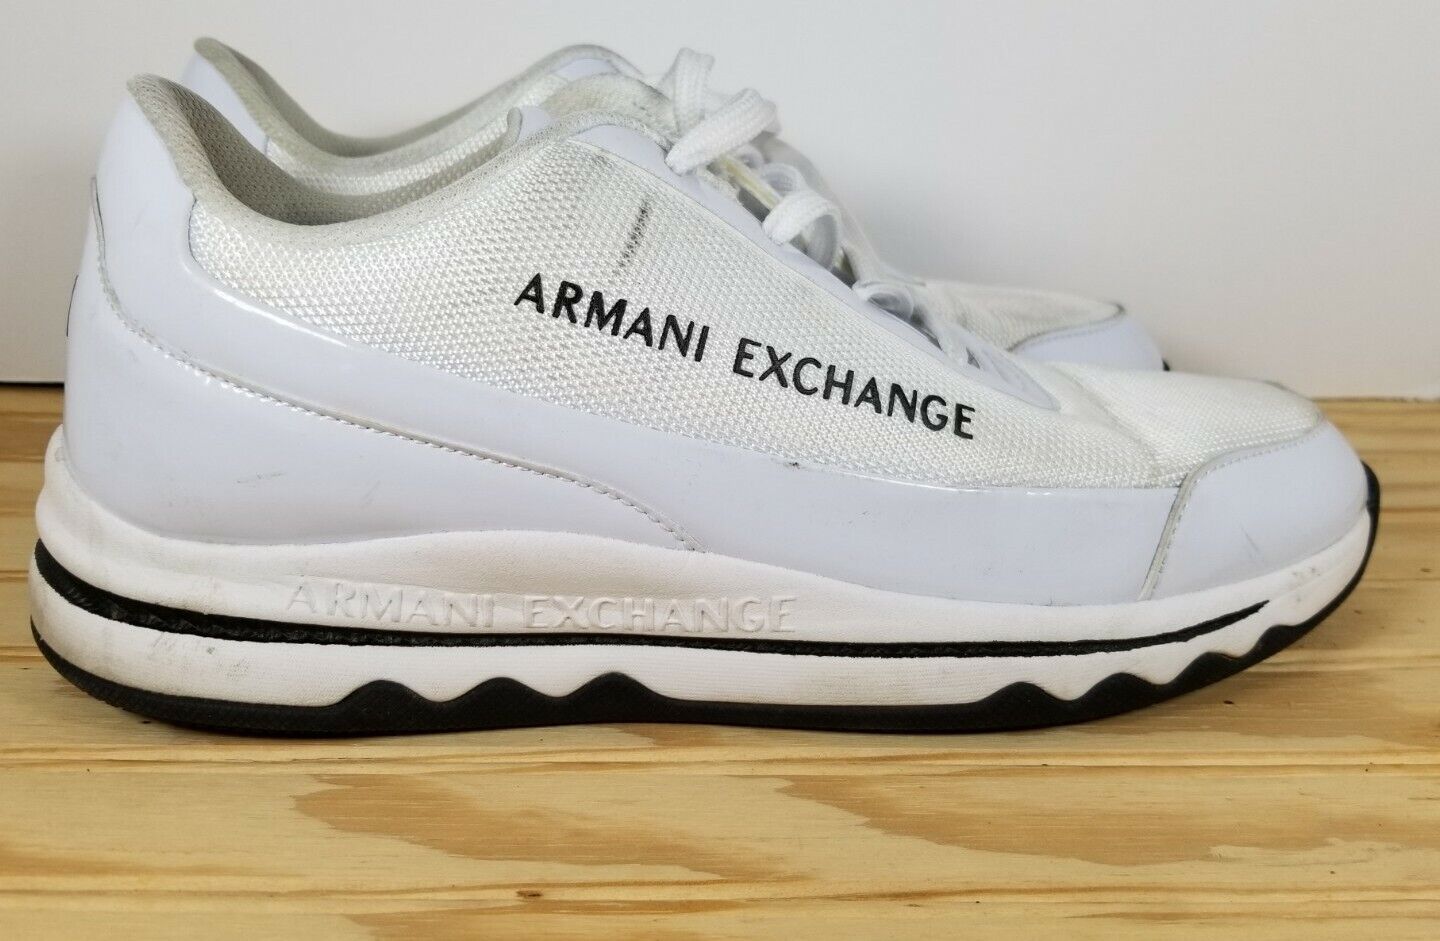 A X Animer and New product!! price revision Armani Exchange Mens Shoe White SneakerSz10